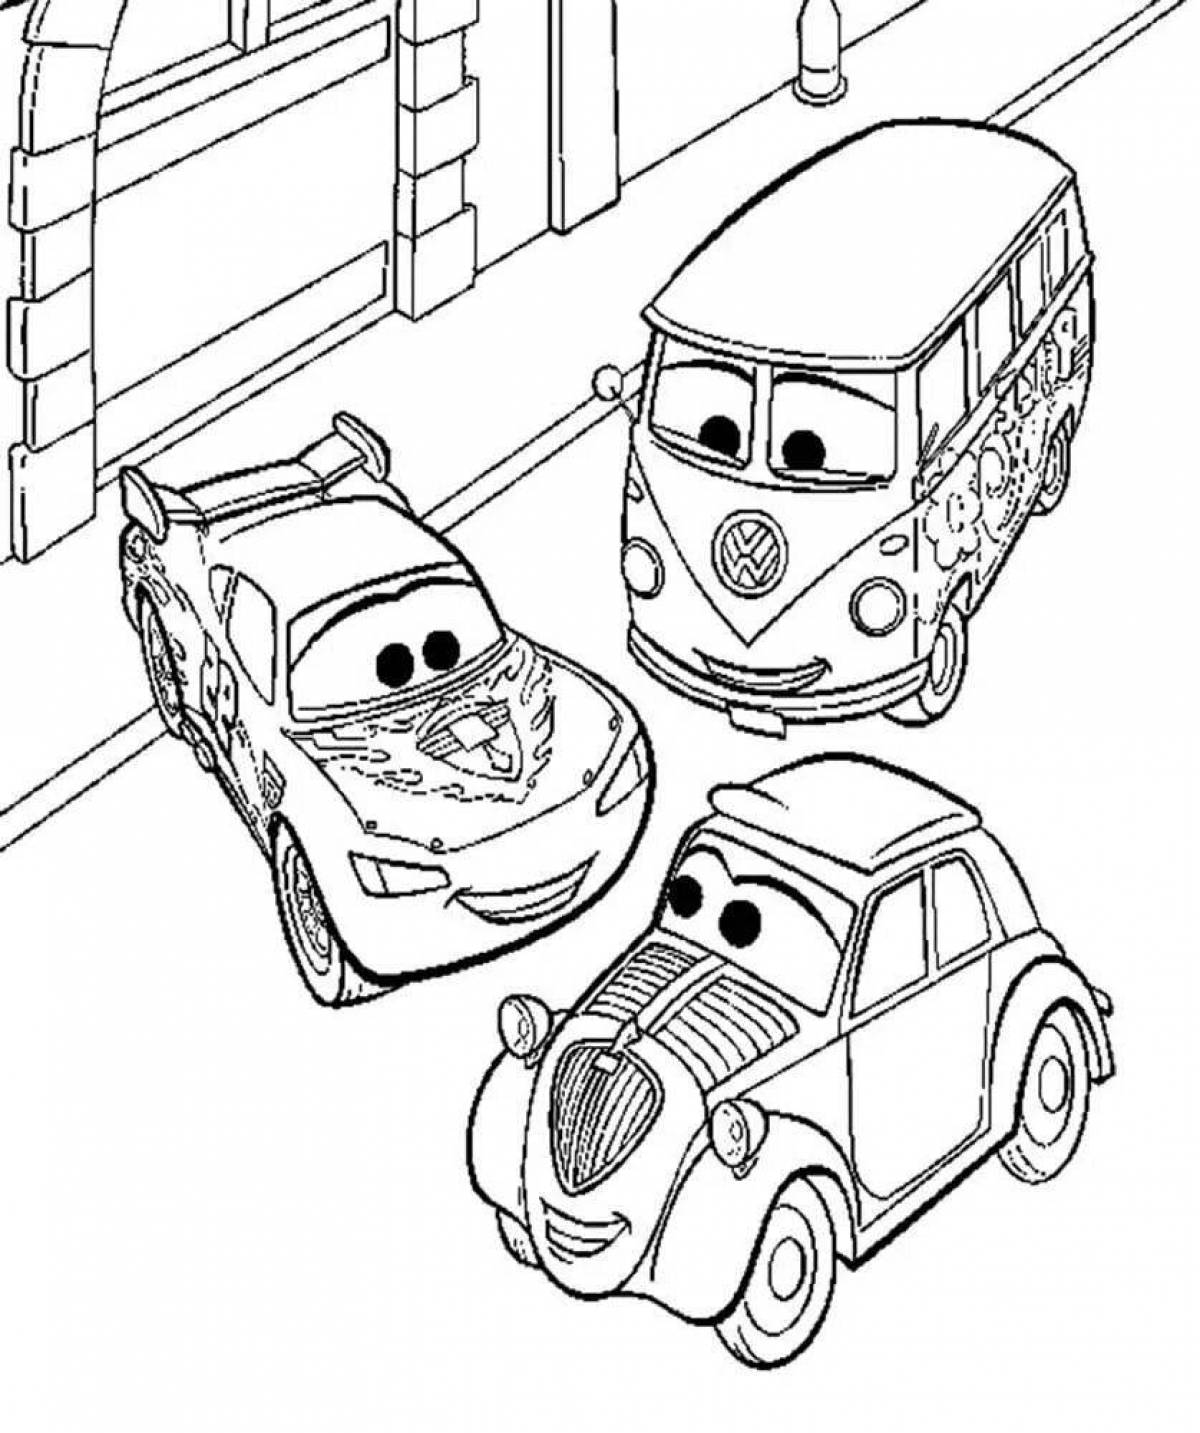 Playful loafers coloring page